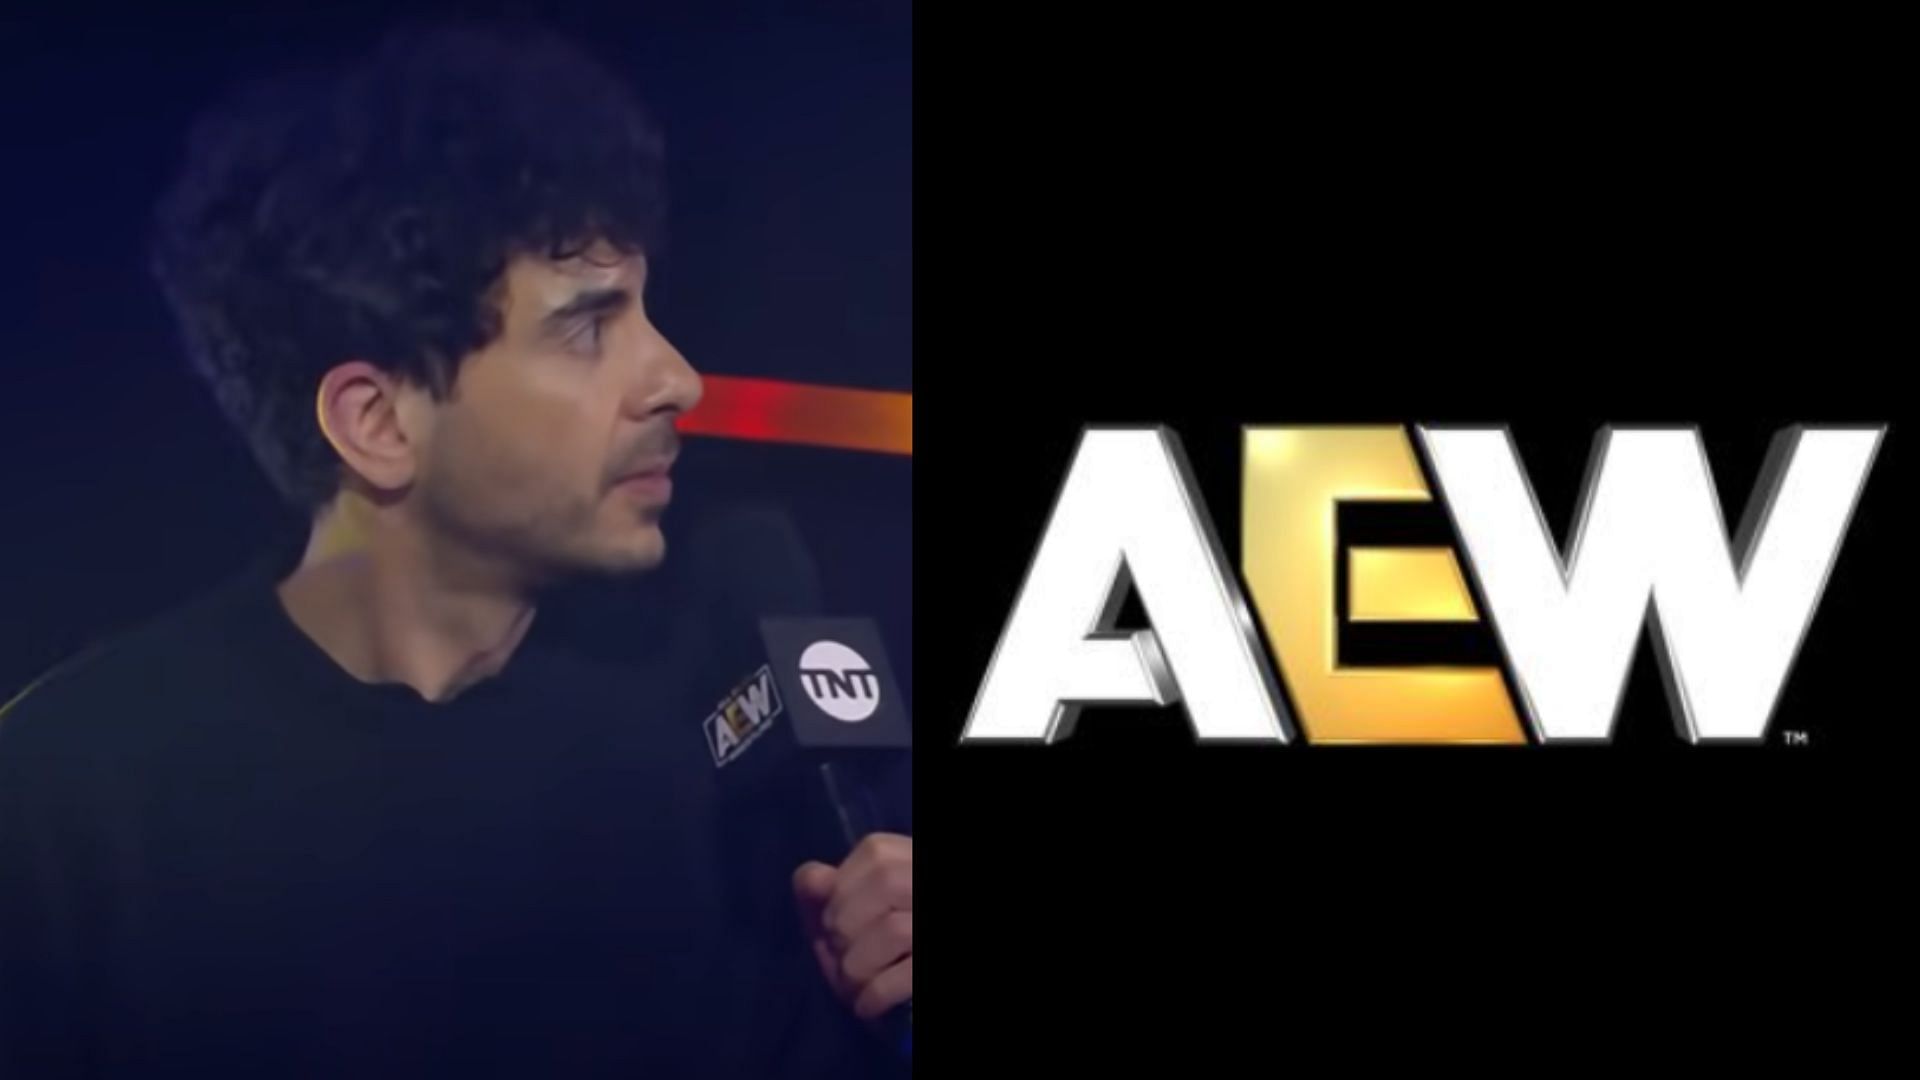 Tony Khan founded AEW in 2019 [Image Credits: AEW